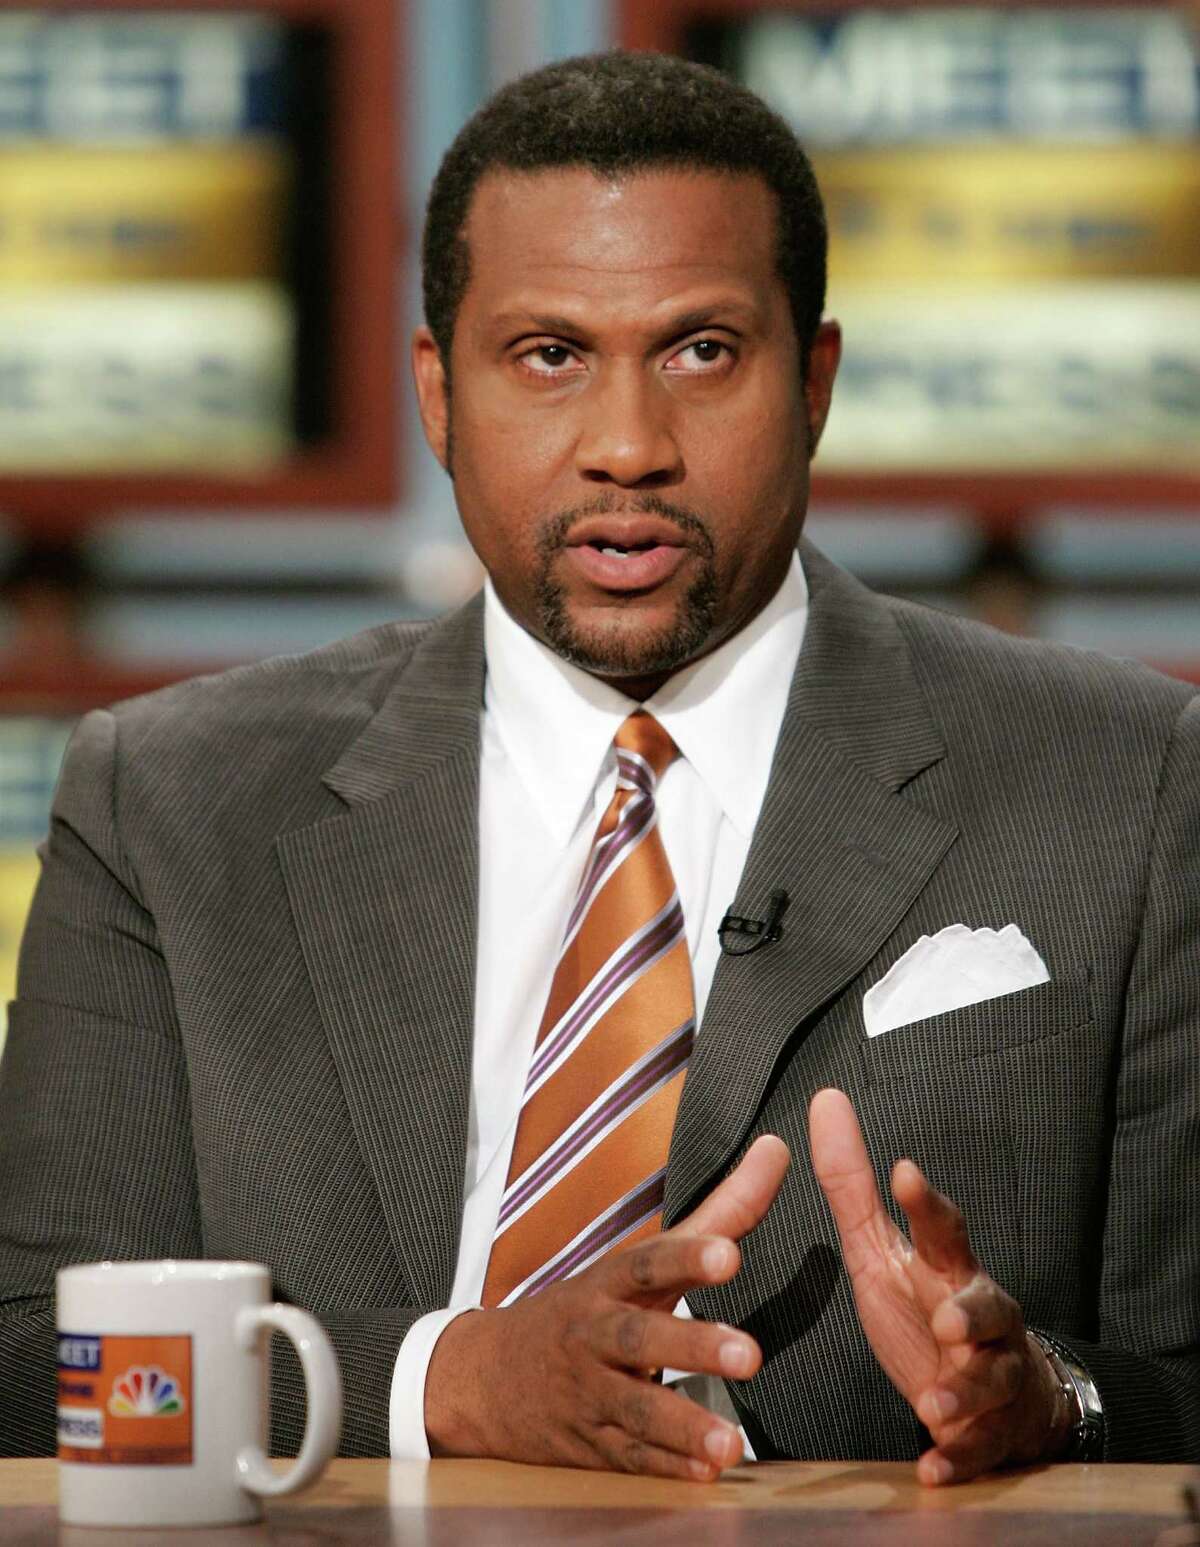 WASHINGTON - JULY 01: Tavis Smiley, host of PBS's "The Tavis Smiley Show," is interviewed by moderator Tim Russert during a taping of "Meet the Press" at the NBC Studios July 1, 2007 in Washington, DC. Smiley spoke on various topics including the U.S. presidential election in 2008. (Photo by Alex Wong/Getty Images for Meet the Press)